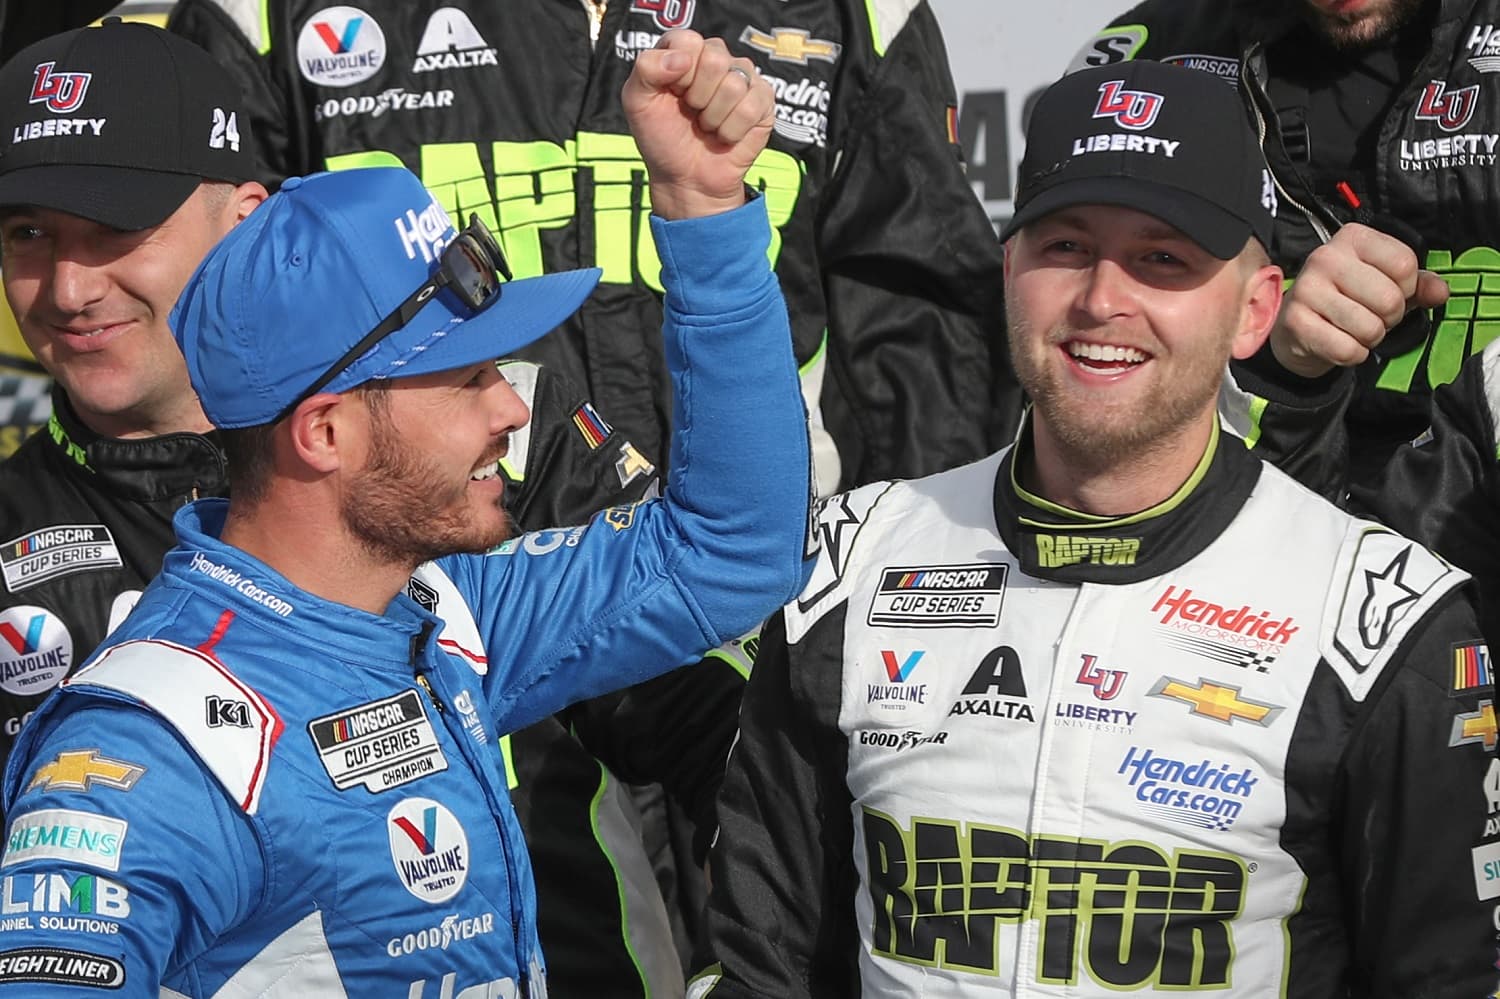 William Byron, right, is congratulated by Kyle Larson in Victory Lane after winning the NASCAR Cup Series Pennzoil 400 at Las Vegas Motor Speedway on March 5, 2023. | Meg Oliphant/Getty Images